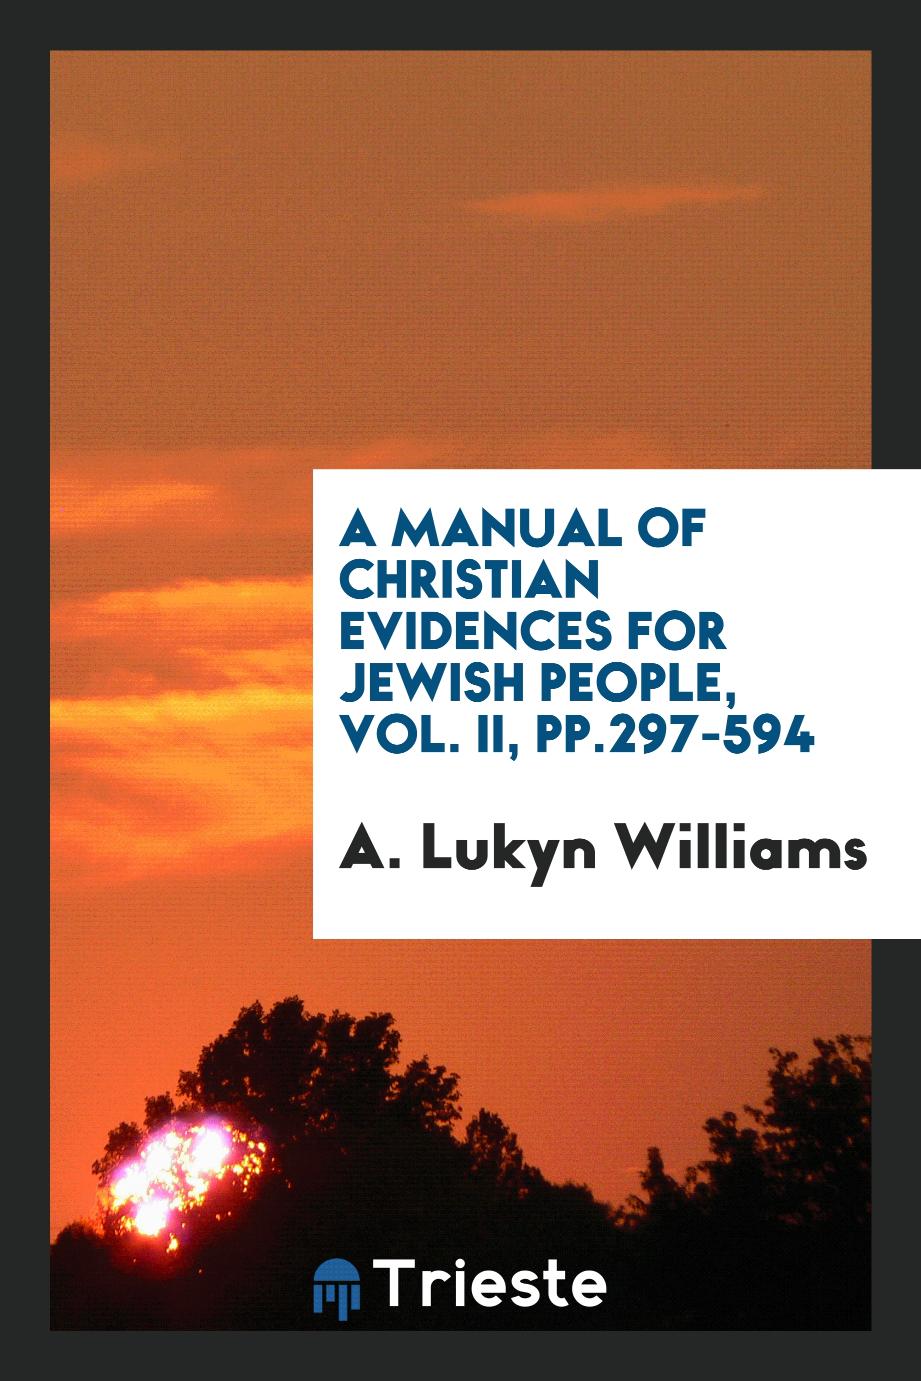 A manual of Christian evidences for Jewish people, Vol. II, pp.297-594